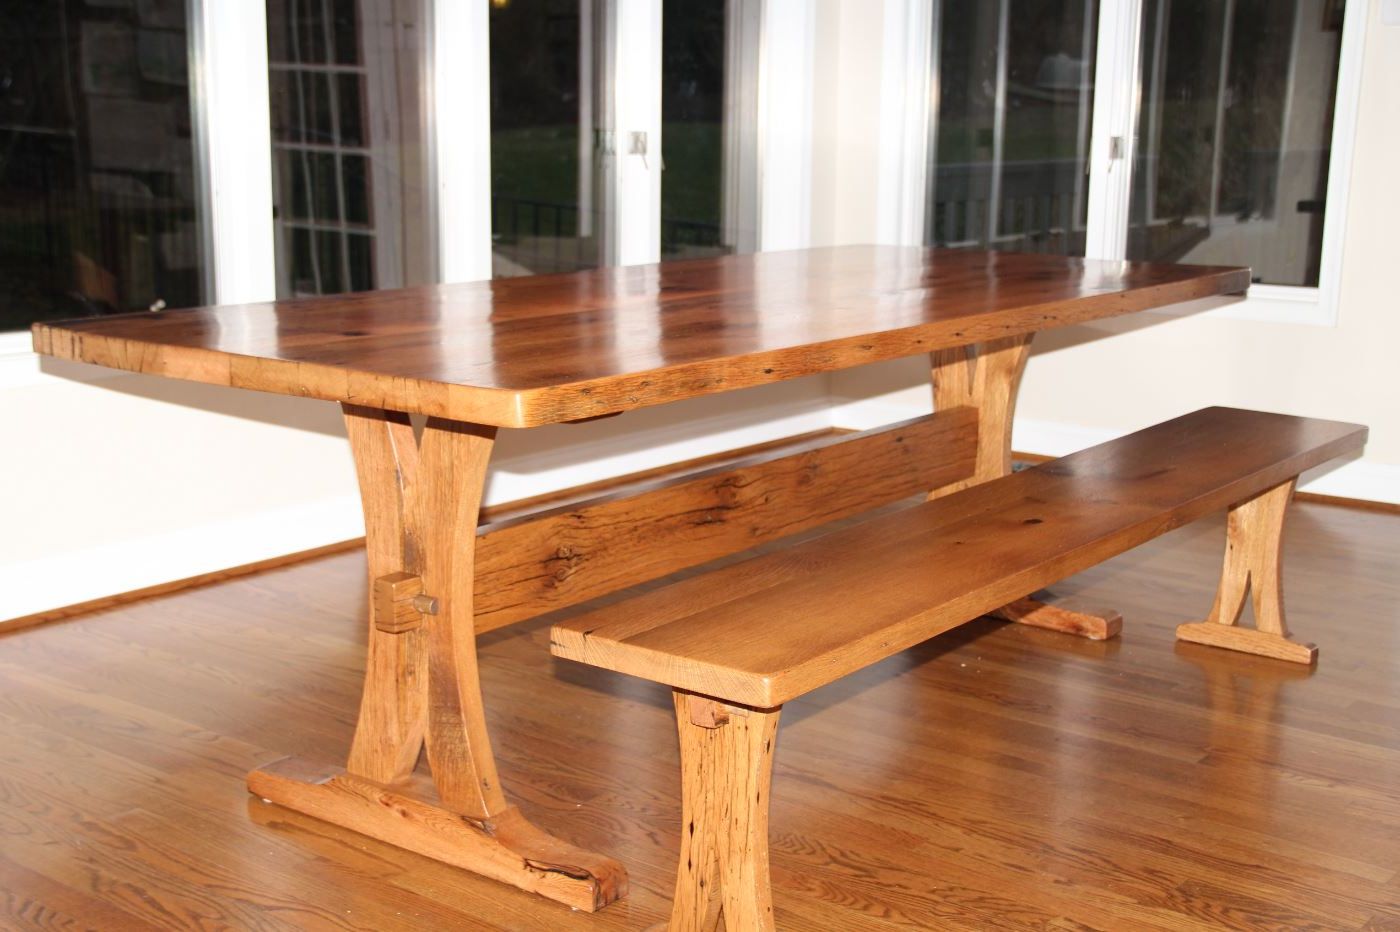 Popular Trestle Tables – Reclaimed Wood Farm Tables In Pertaining To Nerida Trestle Dining Tables (Gallery 6 of 20)